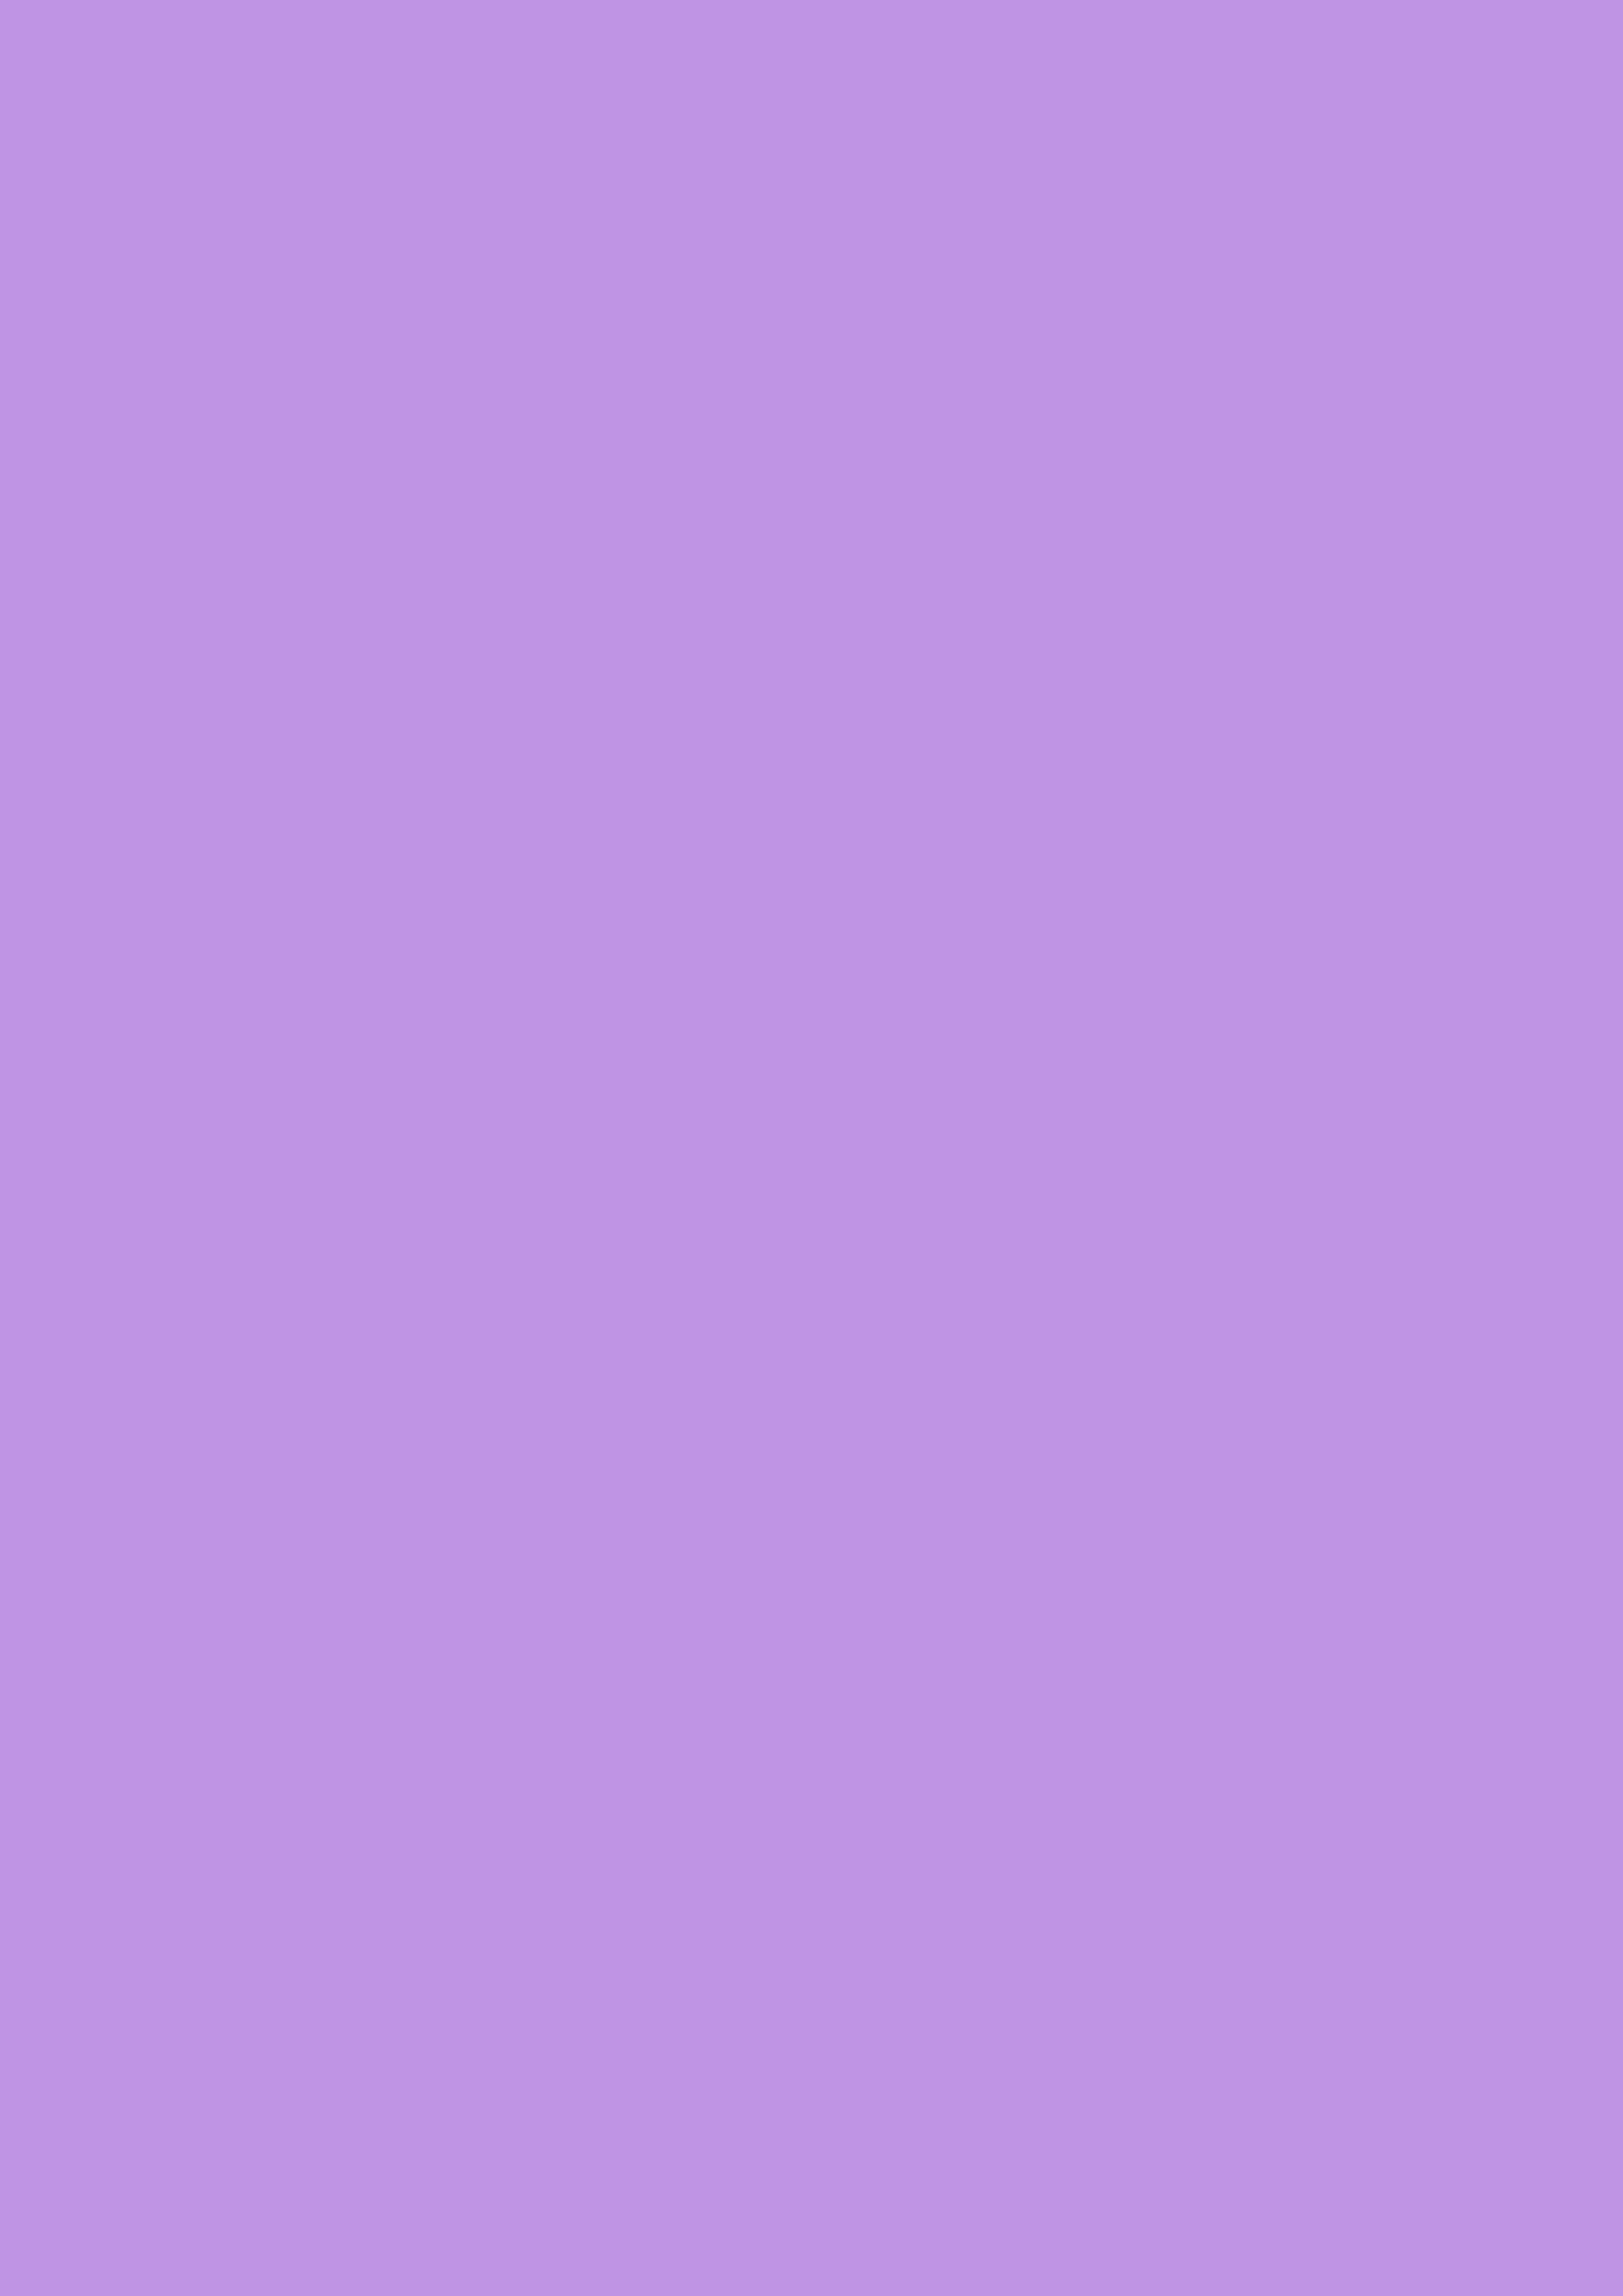 2480x3508 Bright Lavender Solid Color Background